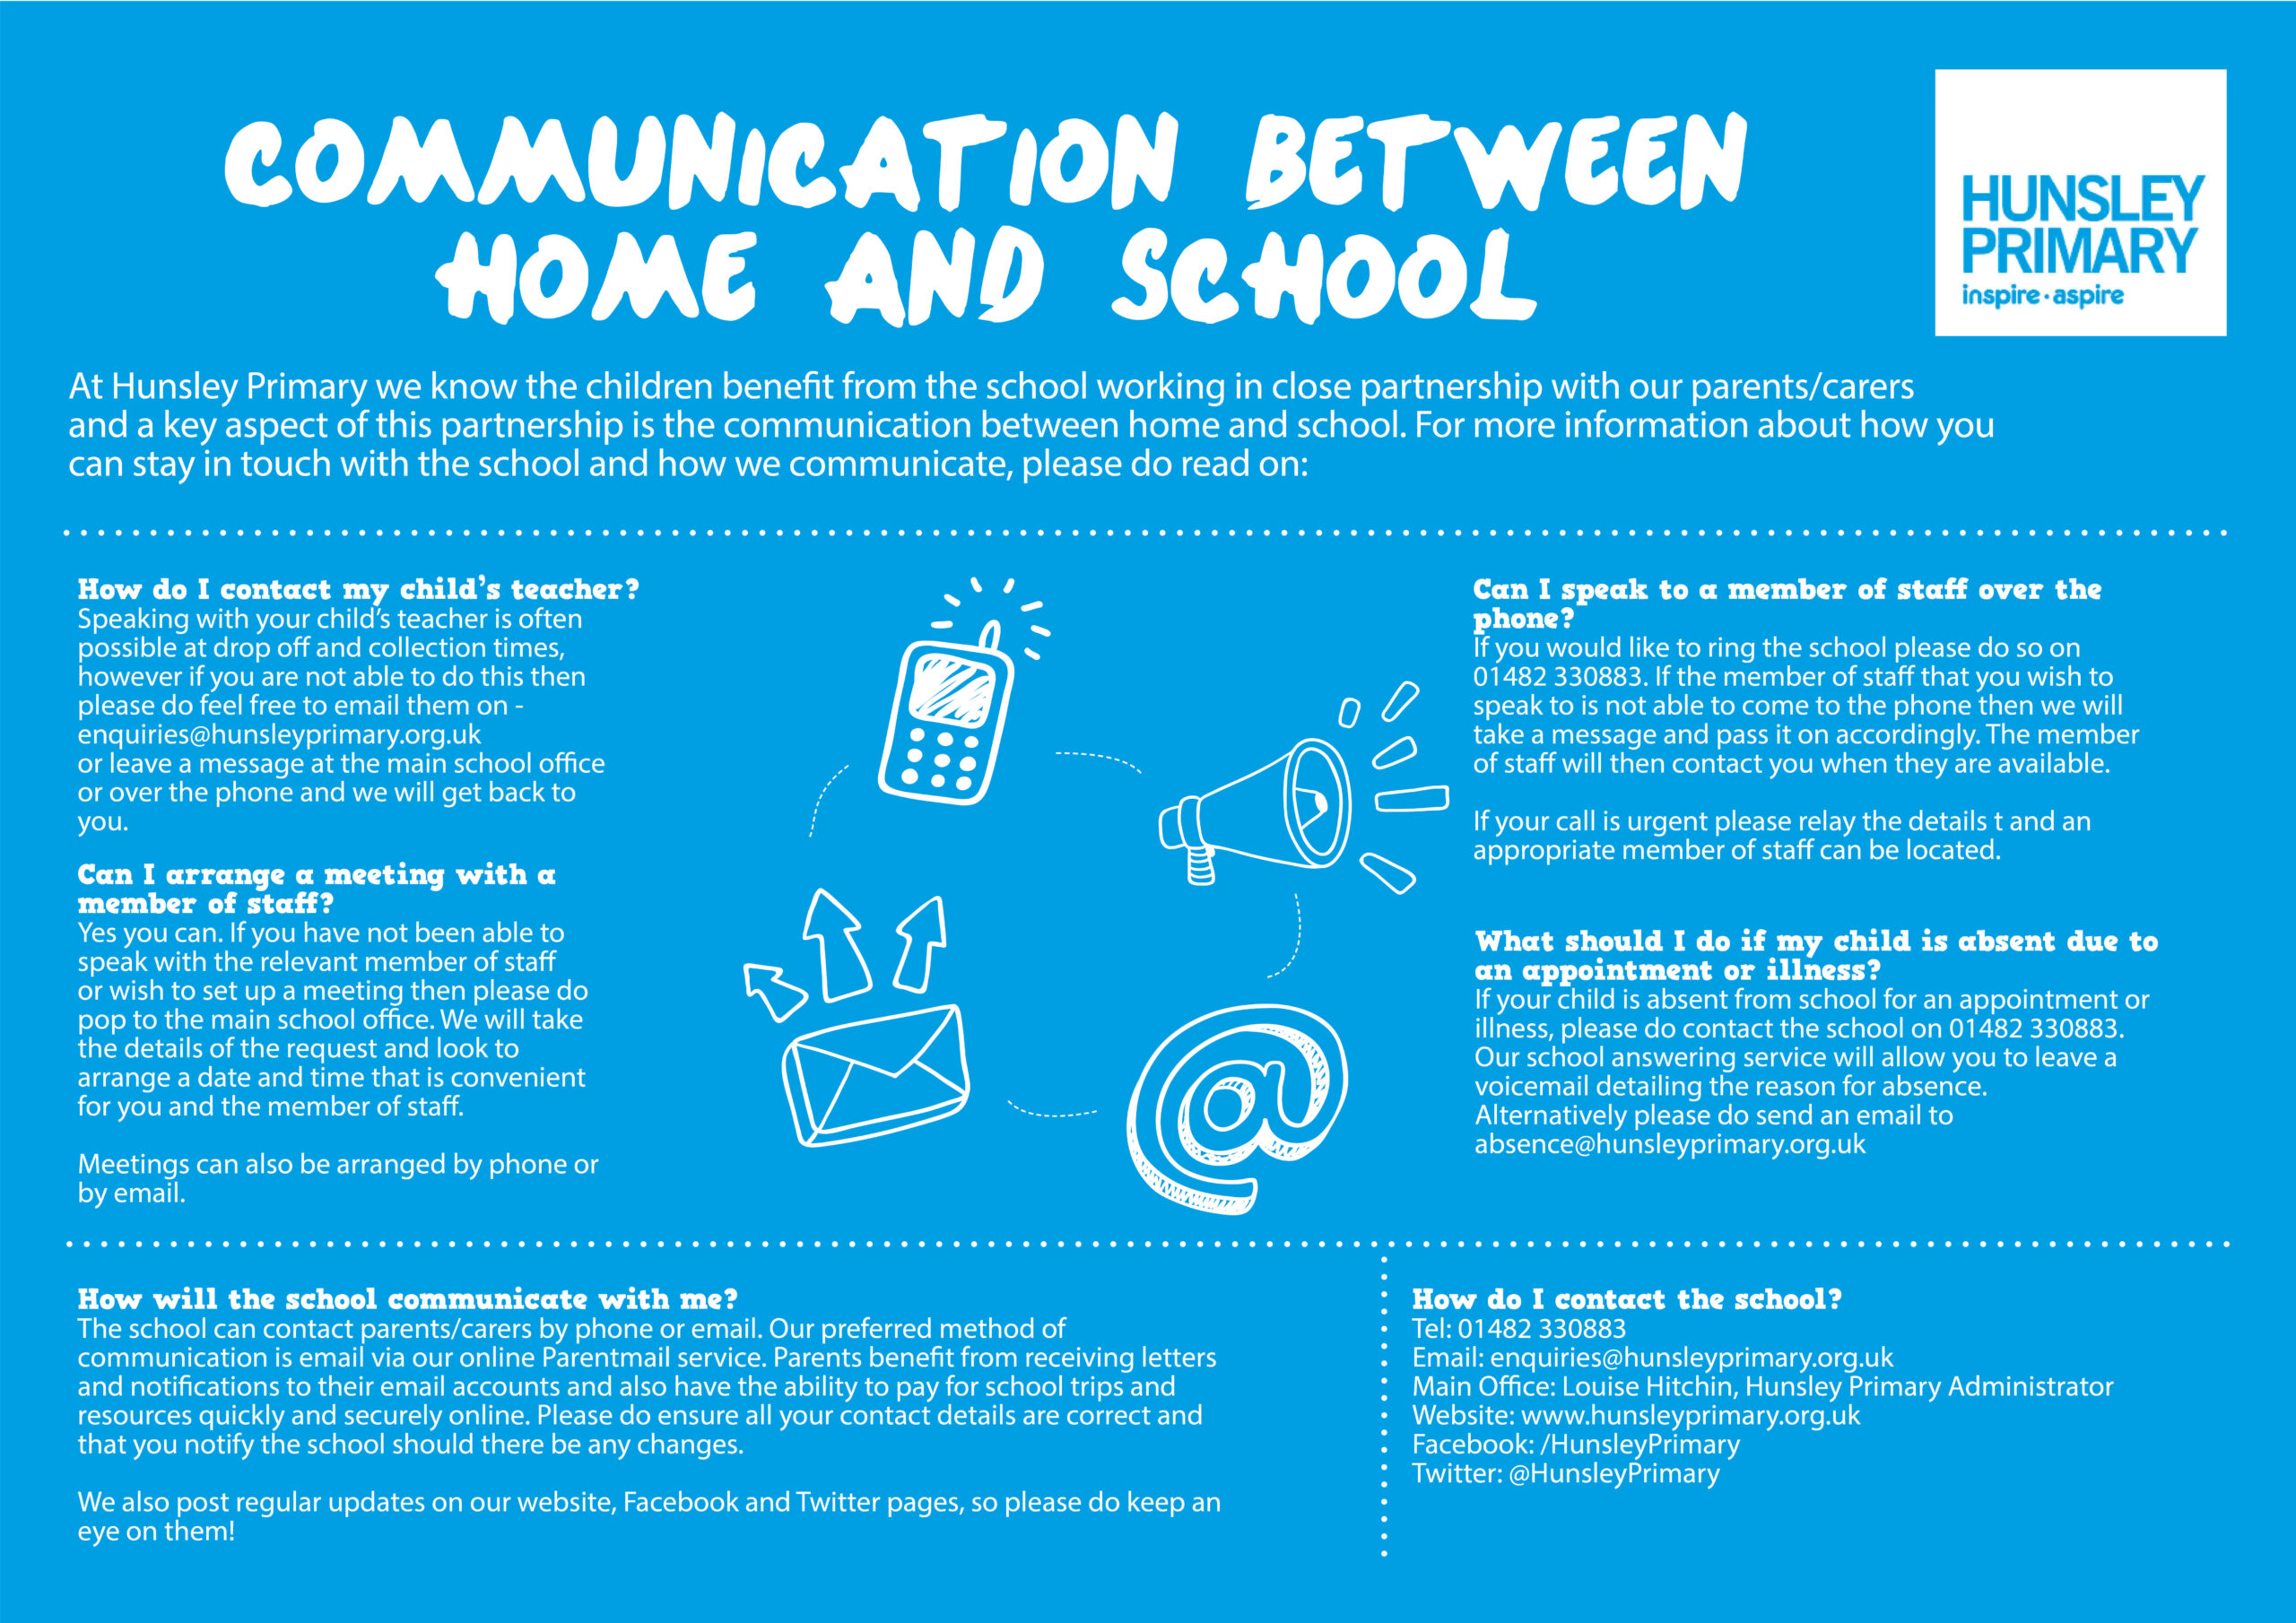 Communication between home and school